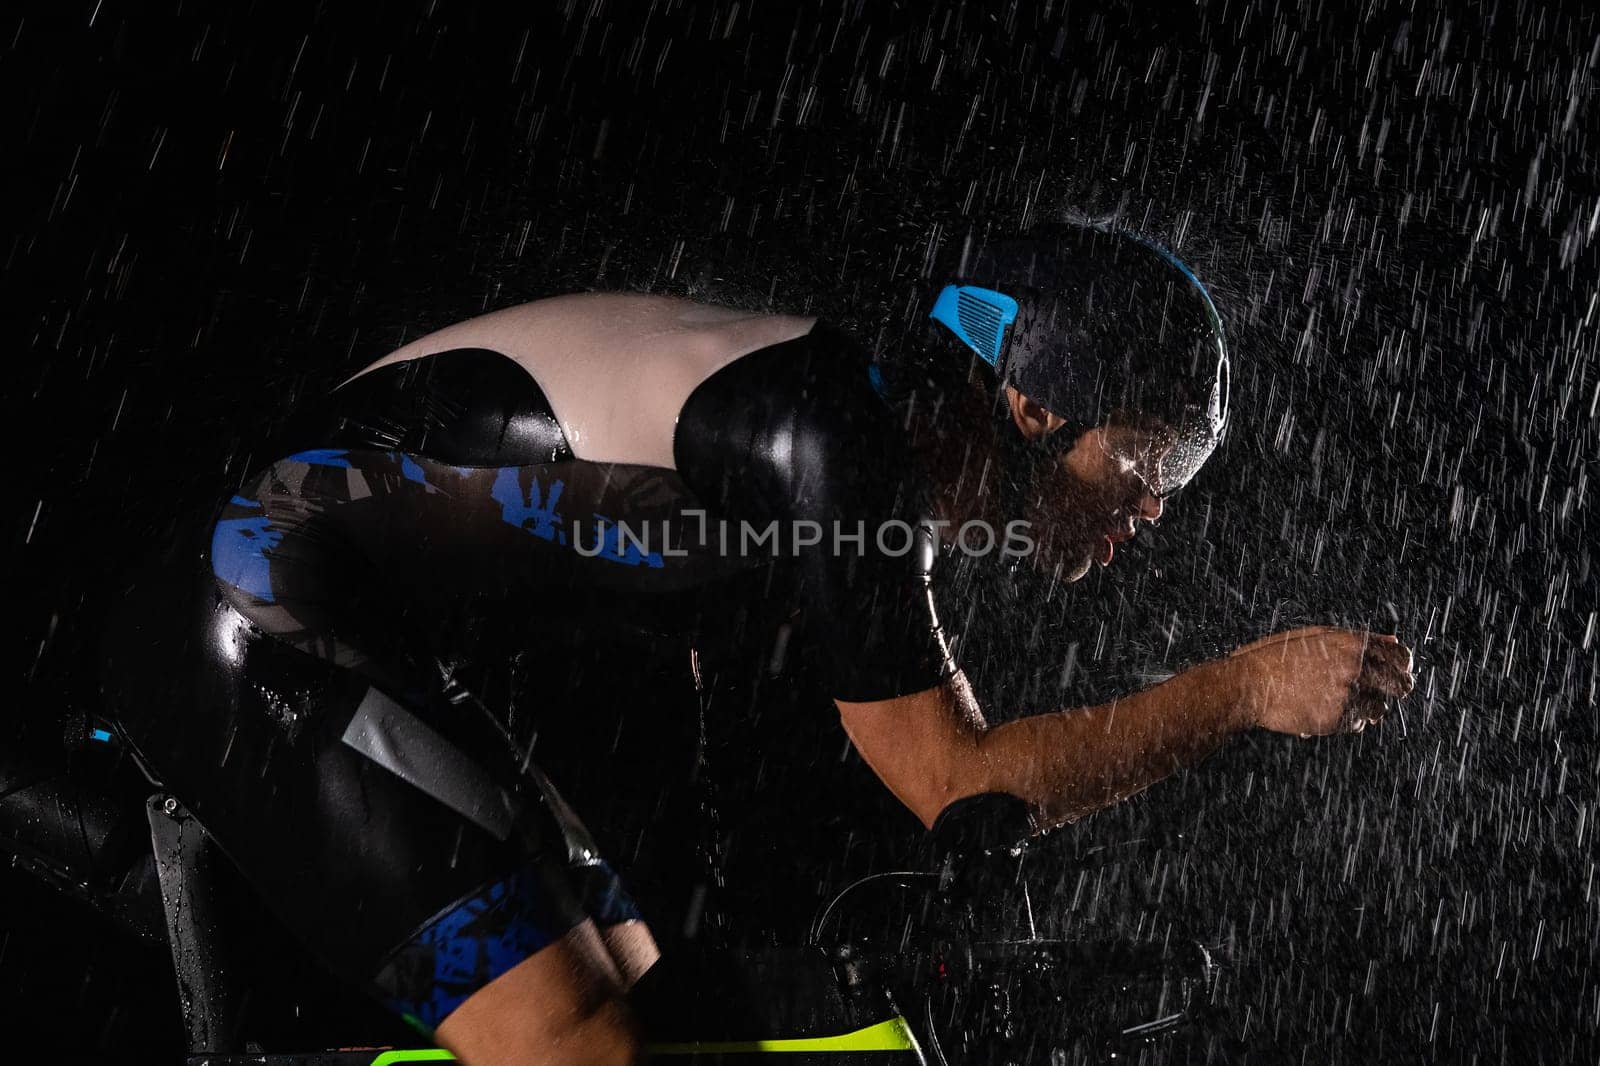 A triathlete braving the rain as he cycles through the night, preparing himself for the upcoming marathon. The blurred raindrops in the foreground and the dark, moody atmosphere in the background add to the sense of determination and grit shown by the athlete. by dotshock